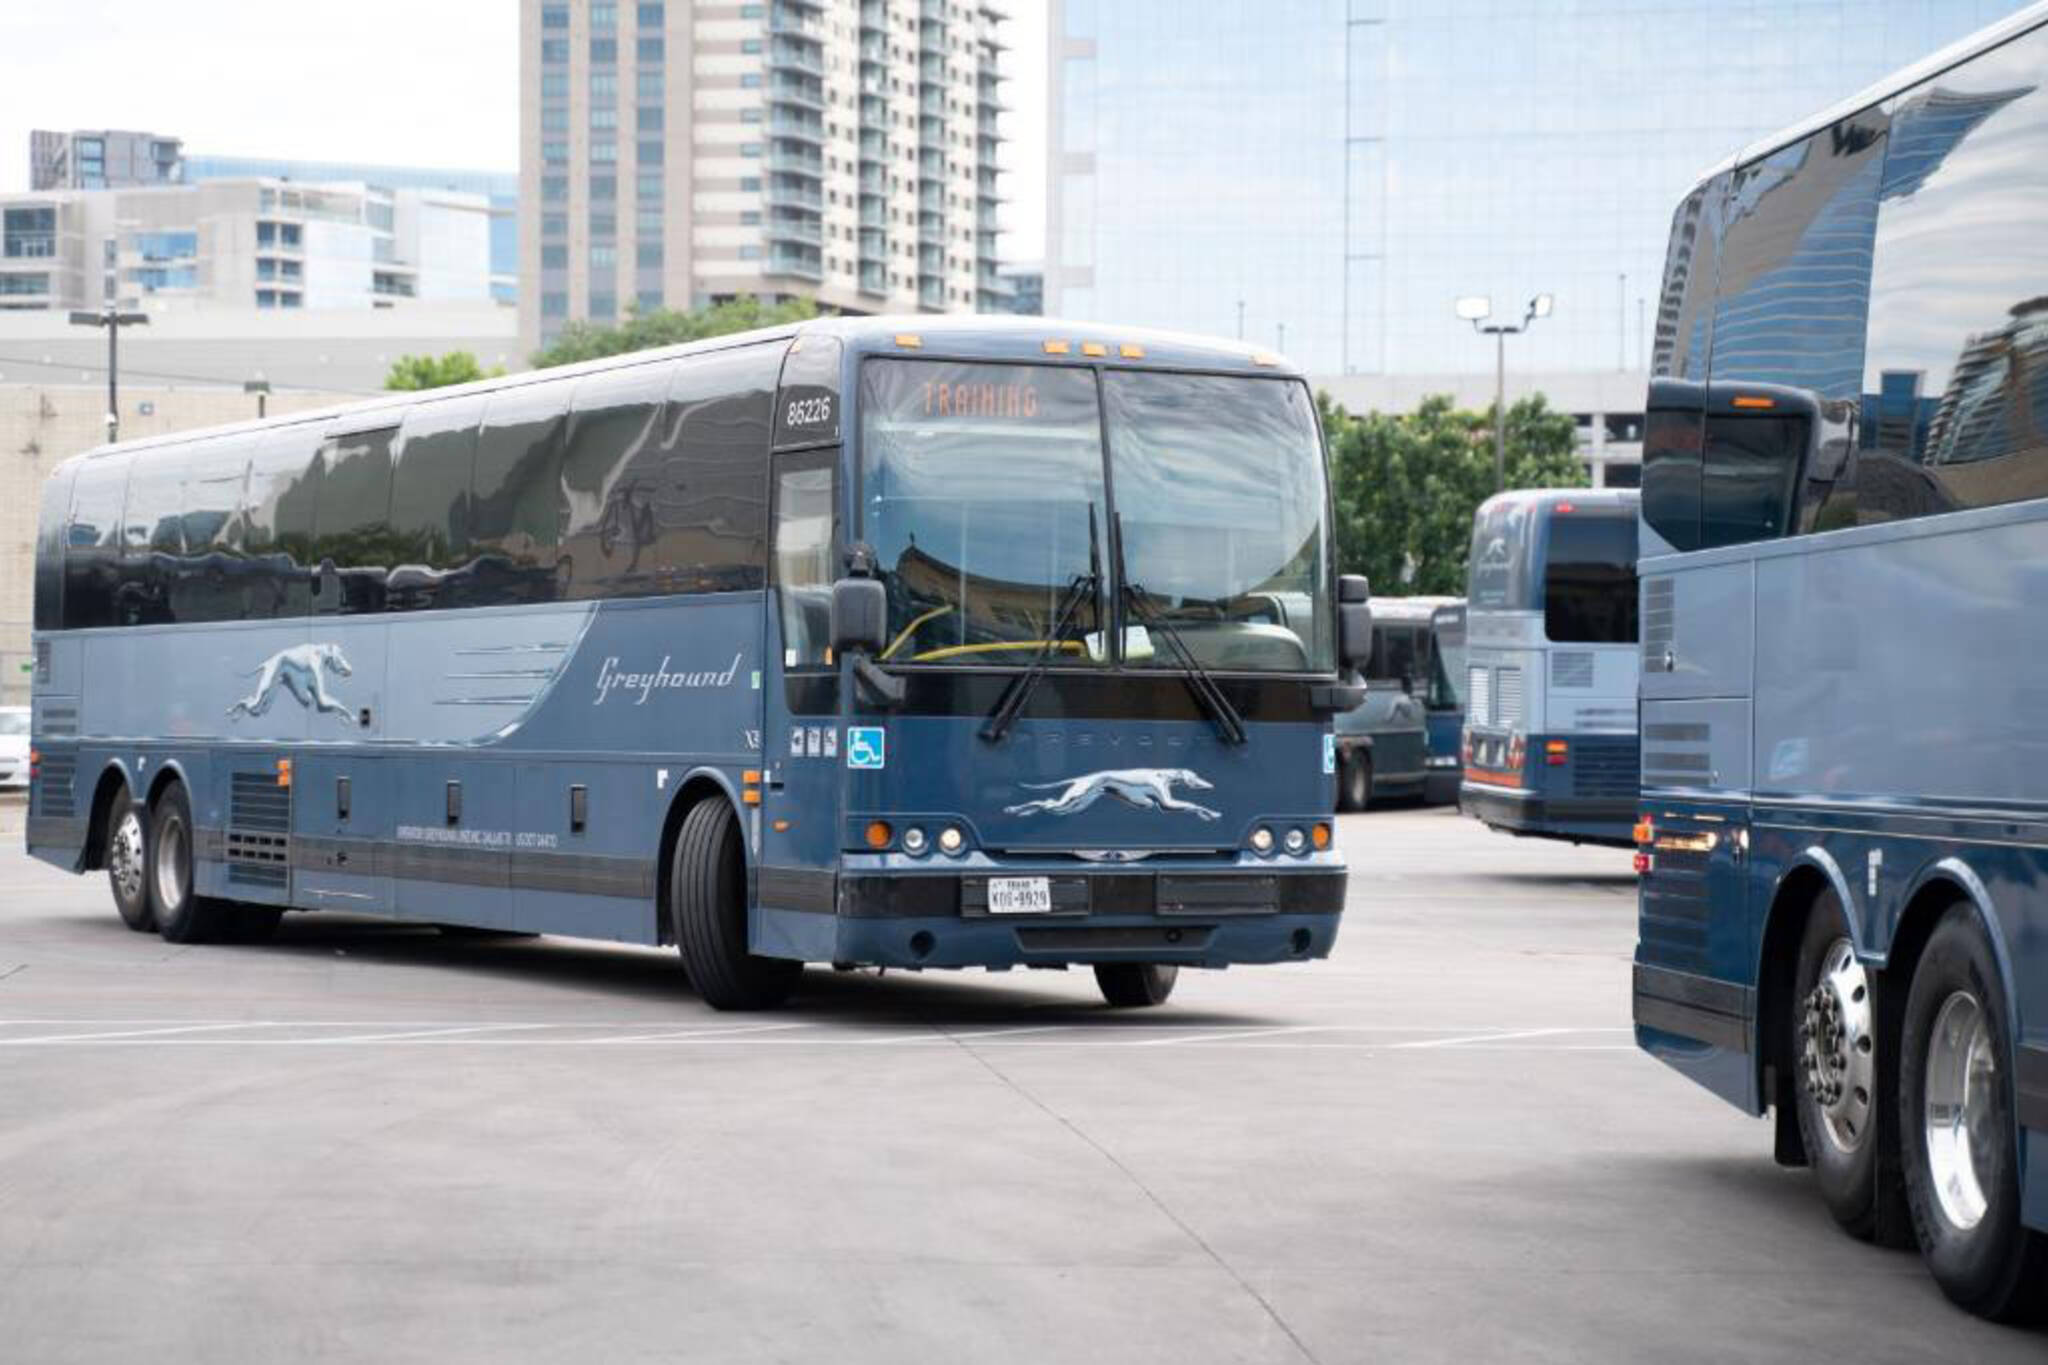 Greyhound Canada is permanently shutting down and cancelling all bus routes